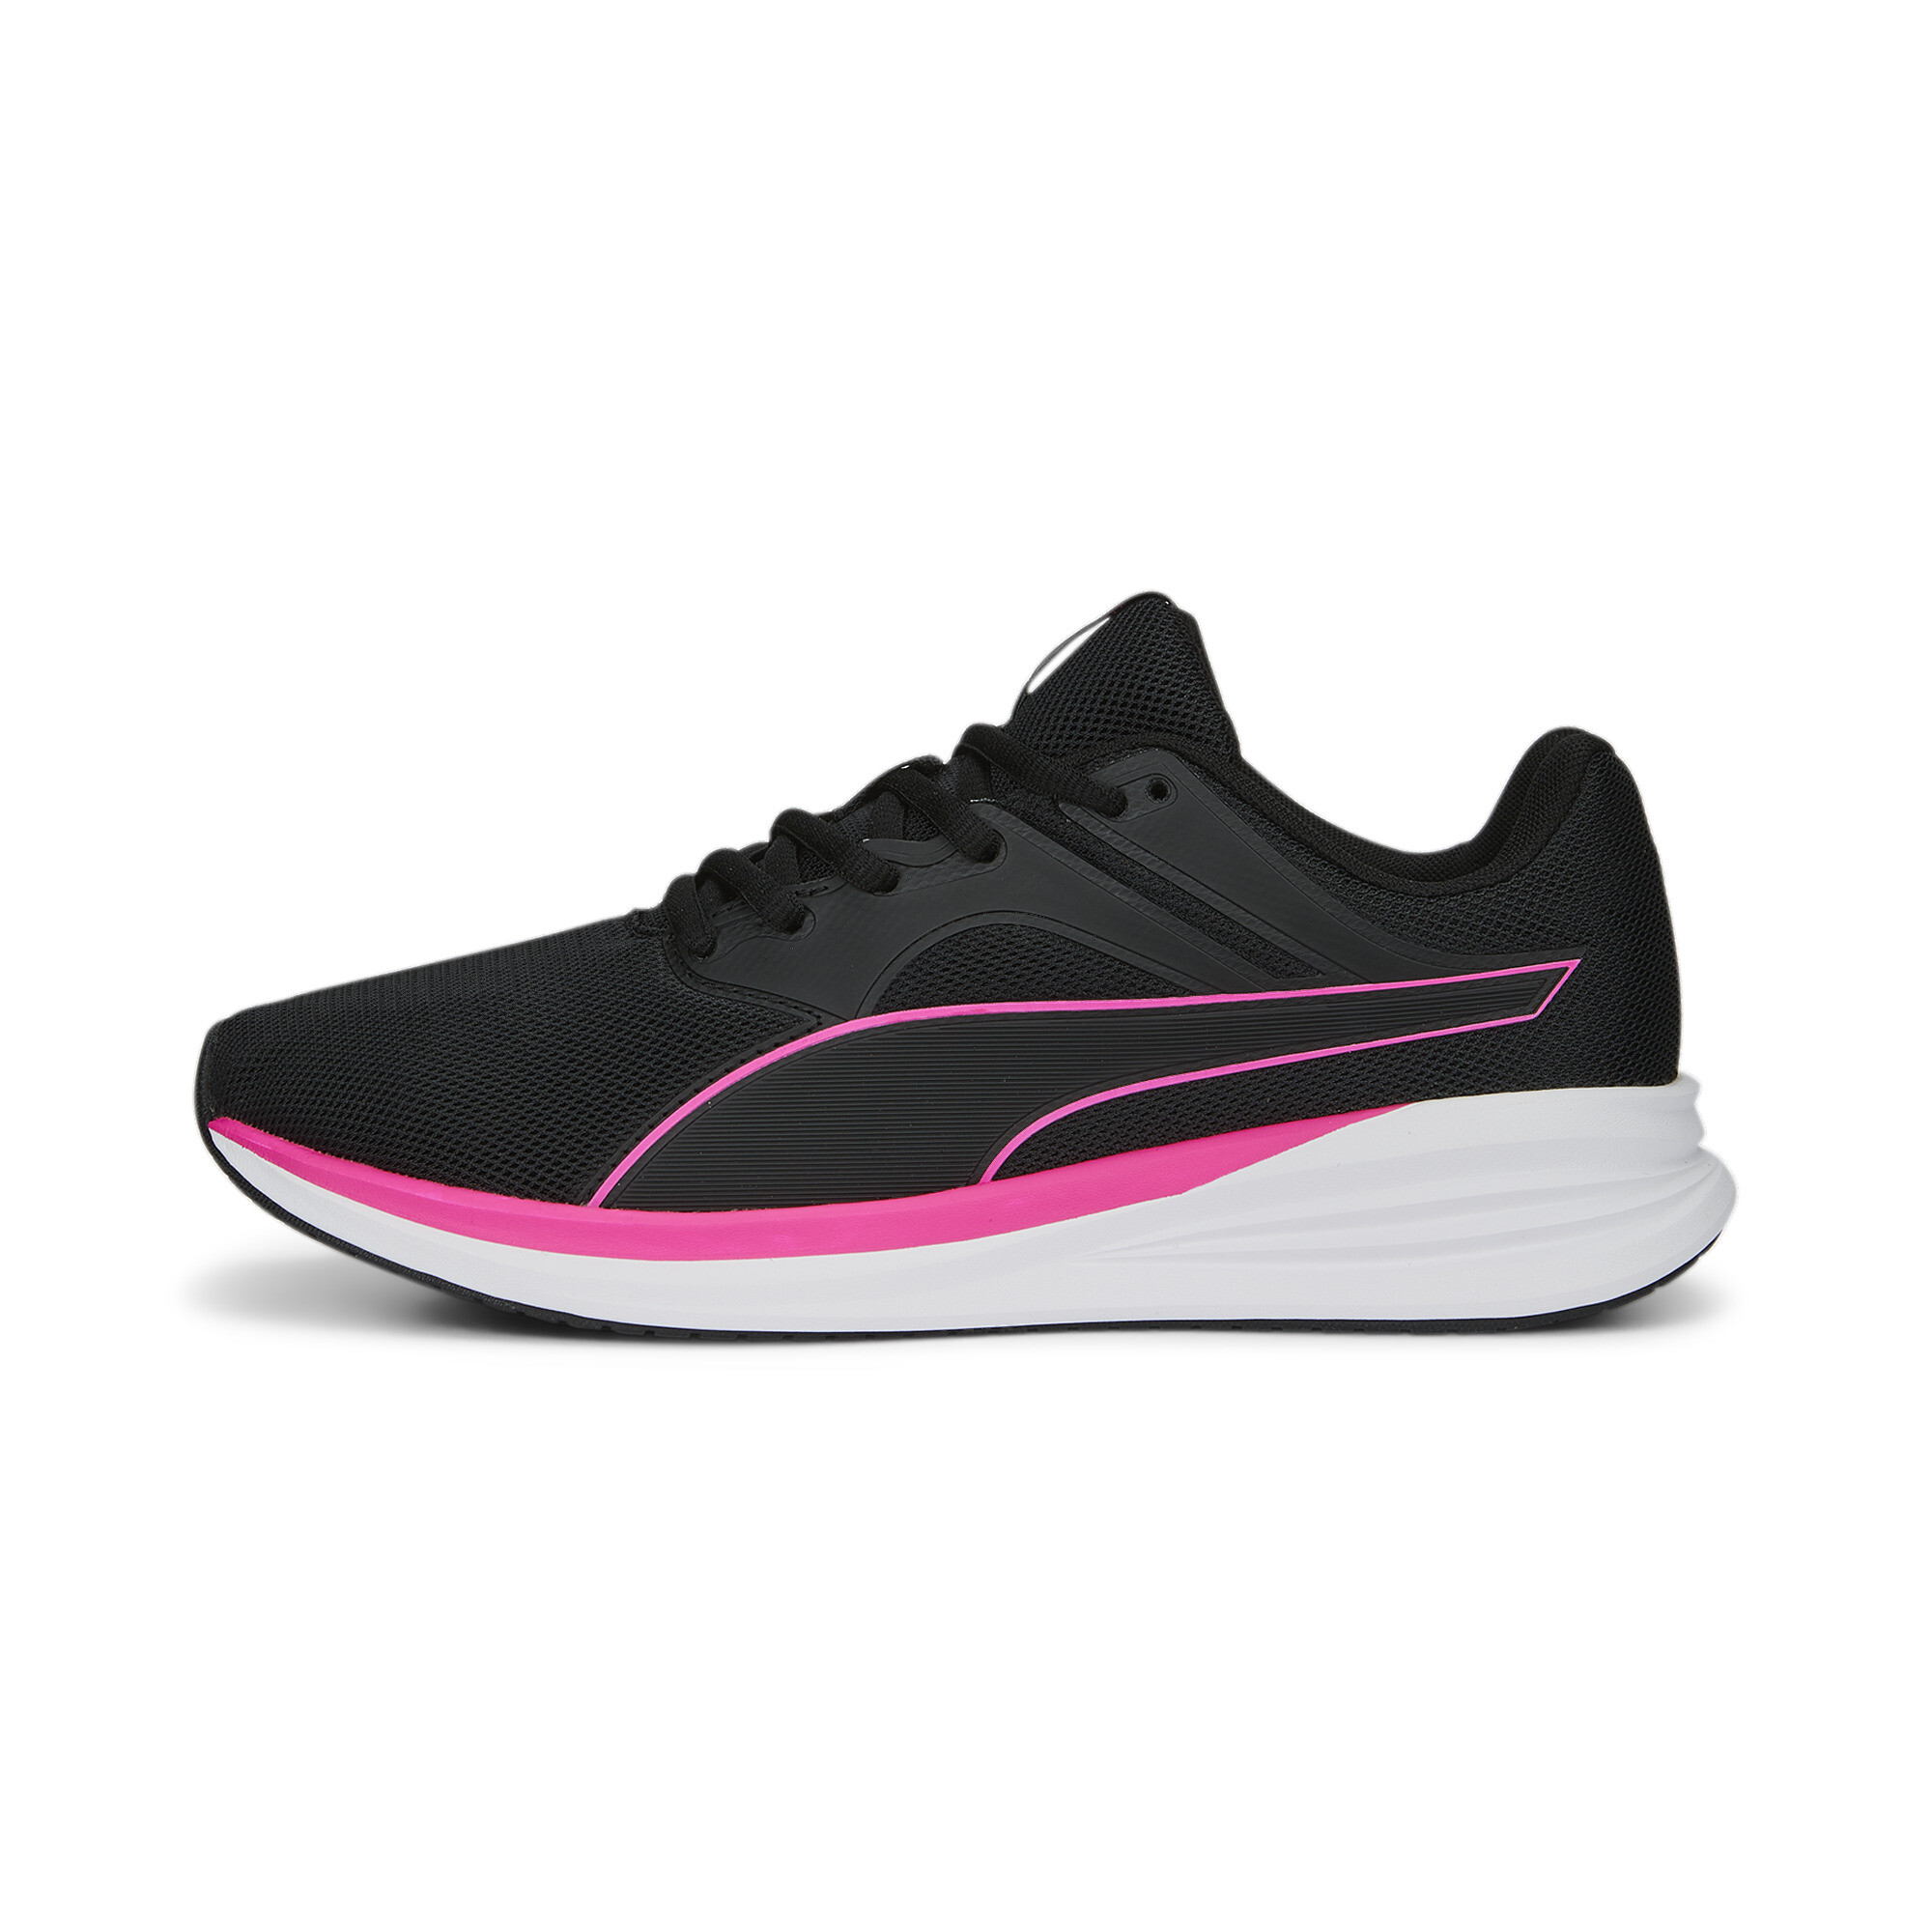 Puma Transport Running Shoes, Black, Size 44, Shoes